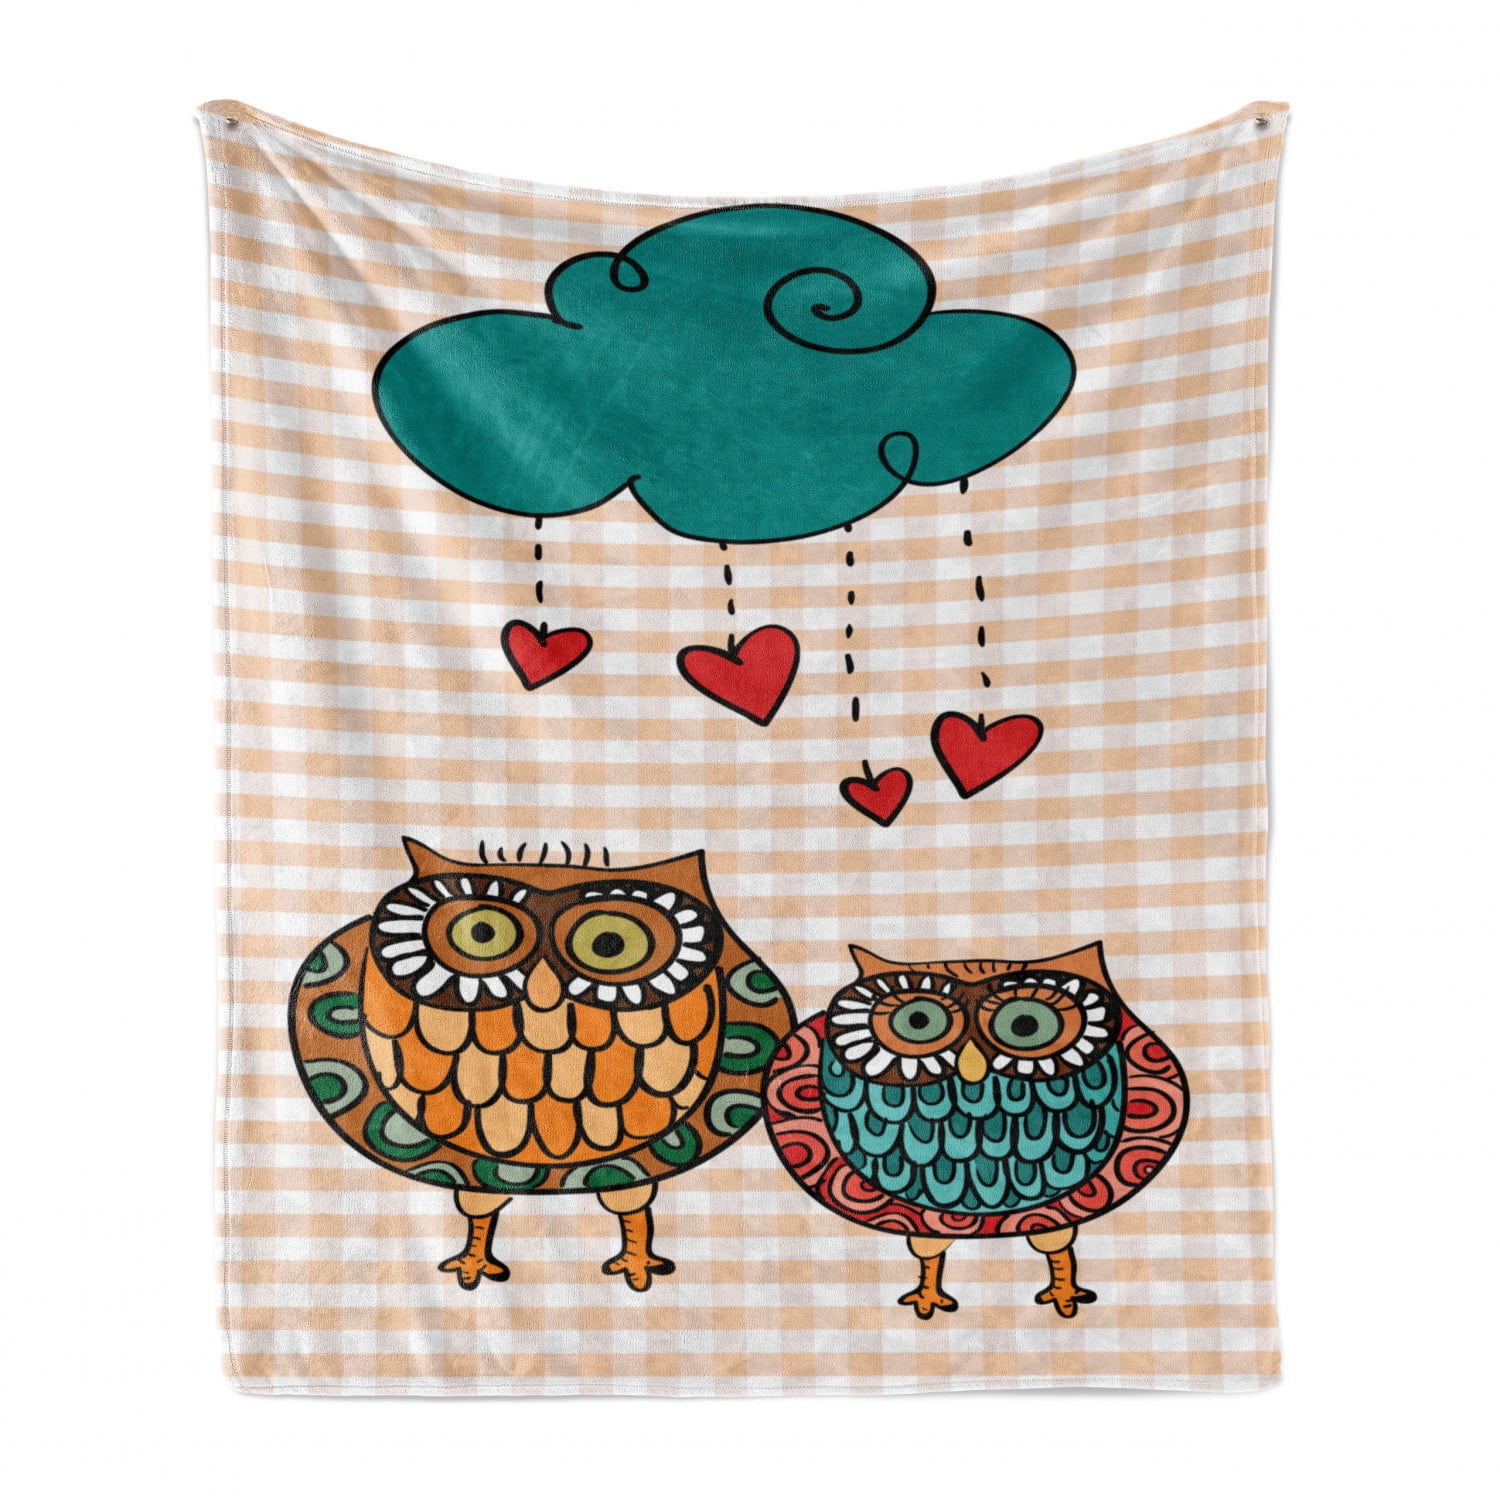 Cat and Owl Pattern All-Season Lightweight Soft Cozy Flannel Fleece Plush Throw Blanket for Travel Bed Sofa Double-Sided Print 